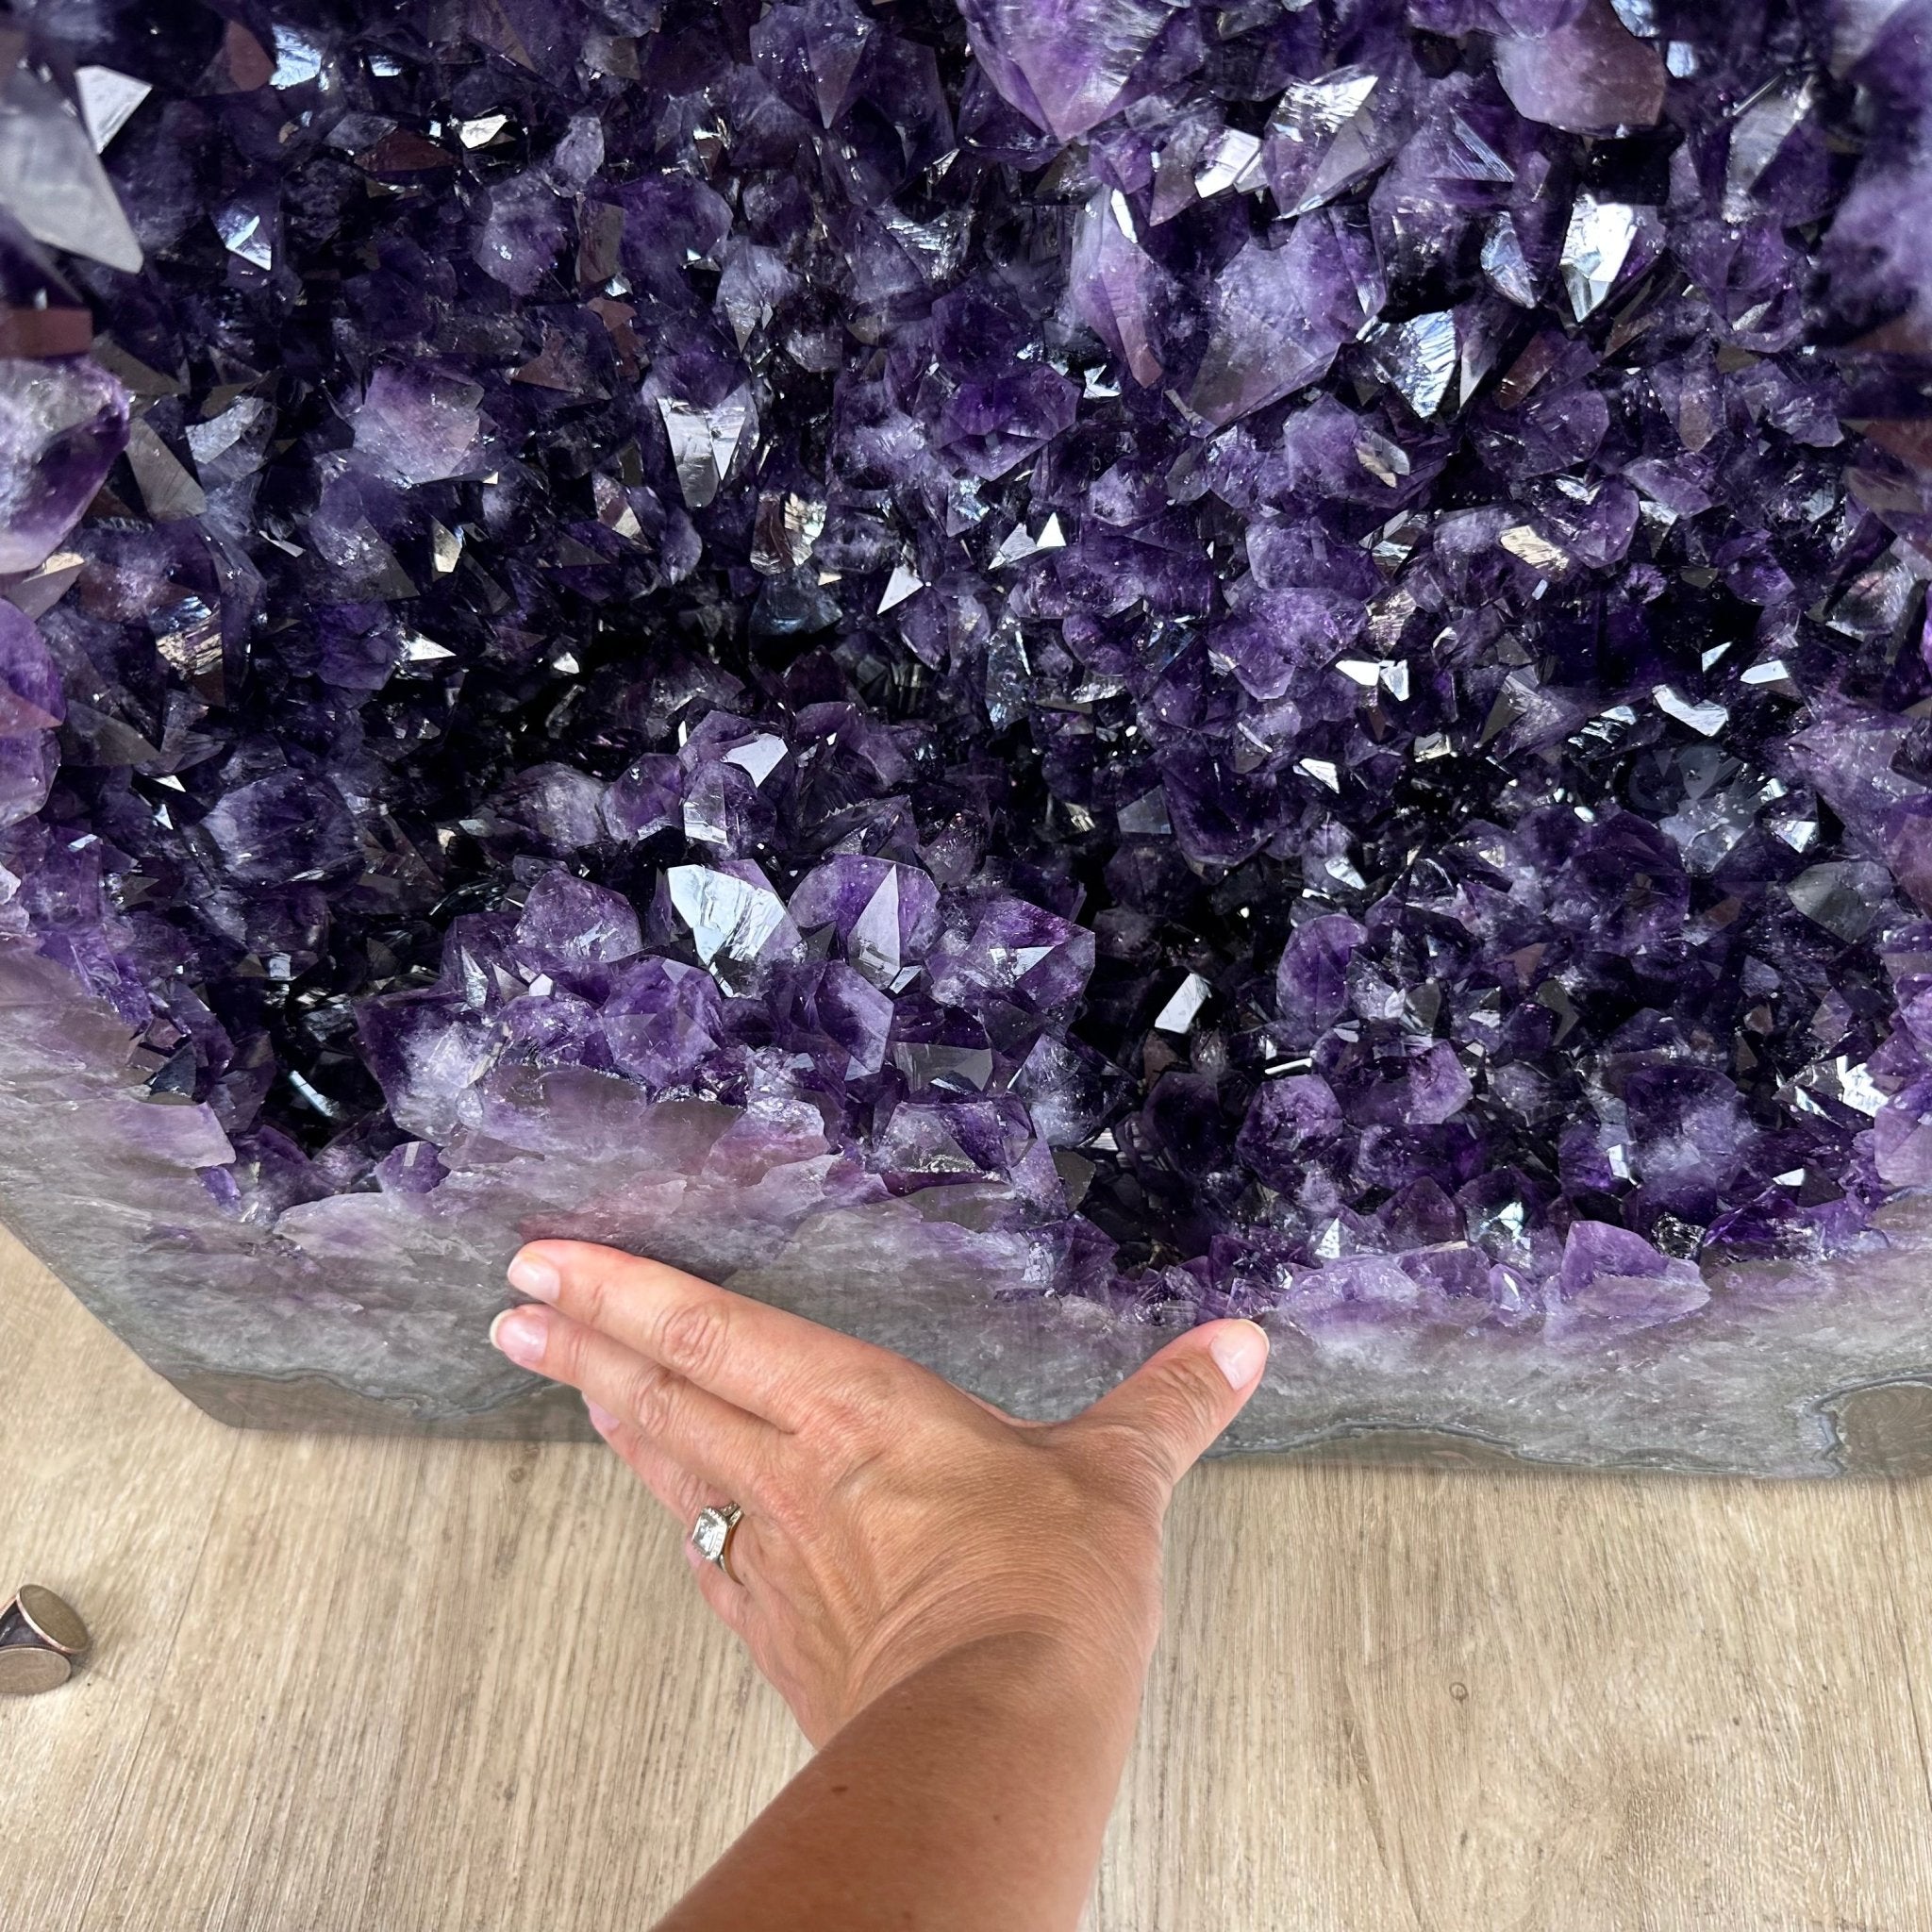 Large Super Quality Polished Brazilian Amethyst Cathedral, 185.7 lbs & 24.5" tall Model #5602-0073 by Brazil Gems - Brazil GemsBrazil GemsLarge Super Quality Polished Brazilian Amethyst Cathedral, 185.7 lbs & 24.5" tall Model #5602-0073 by Brazil GemsPolished Cathedrals5602-0073